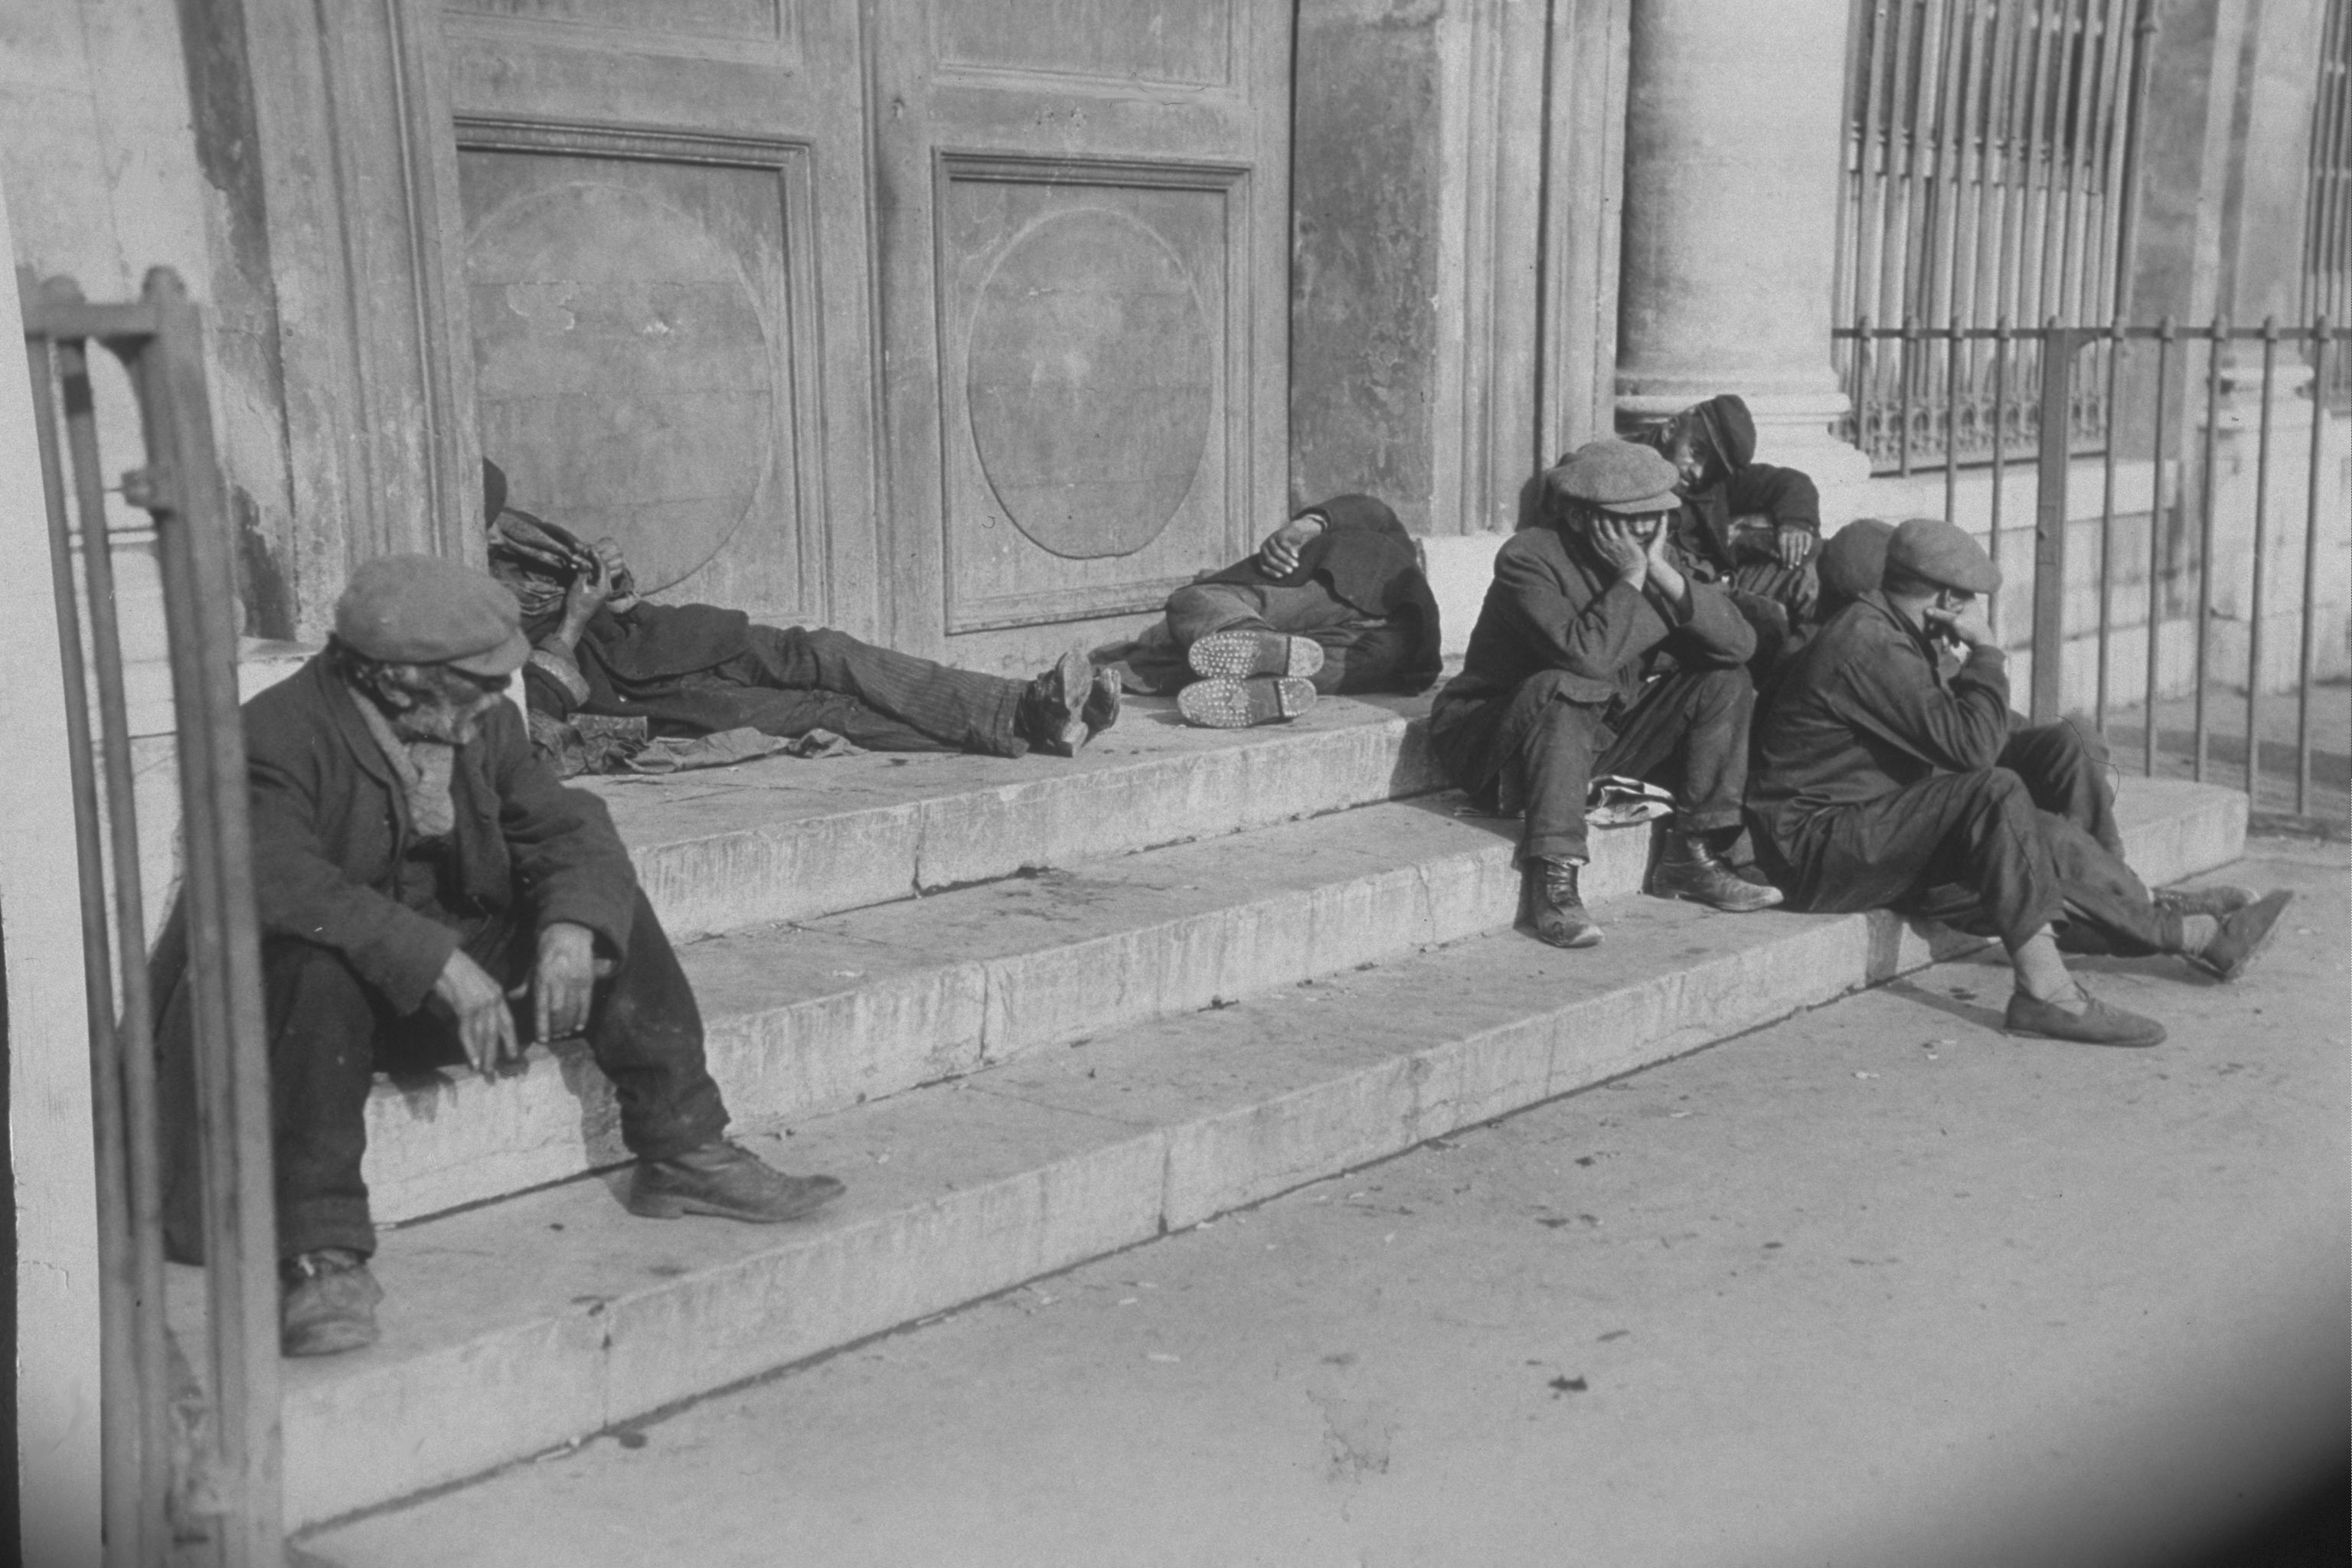 Beggars, suffering from a lack of affordable housing, on the steps of a town hall 